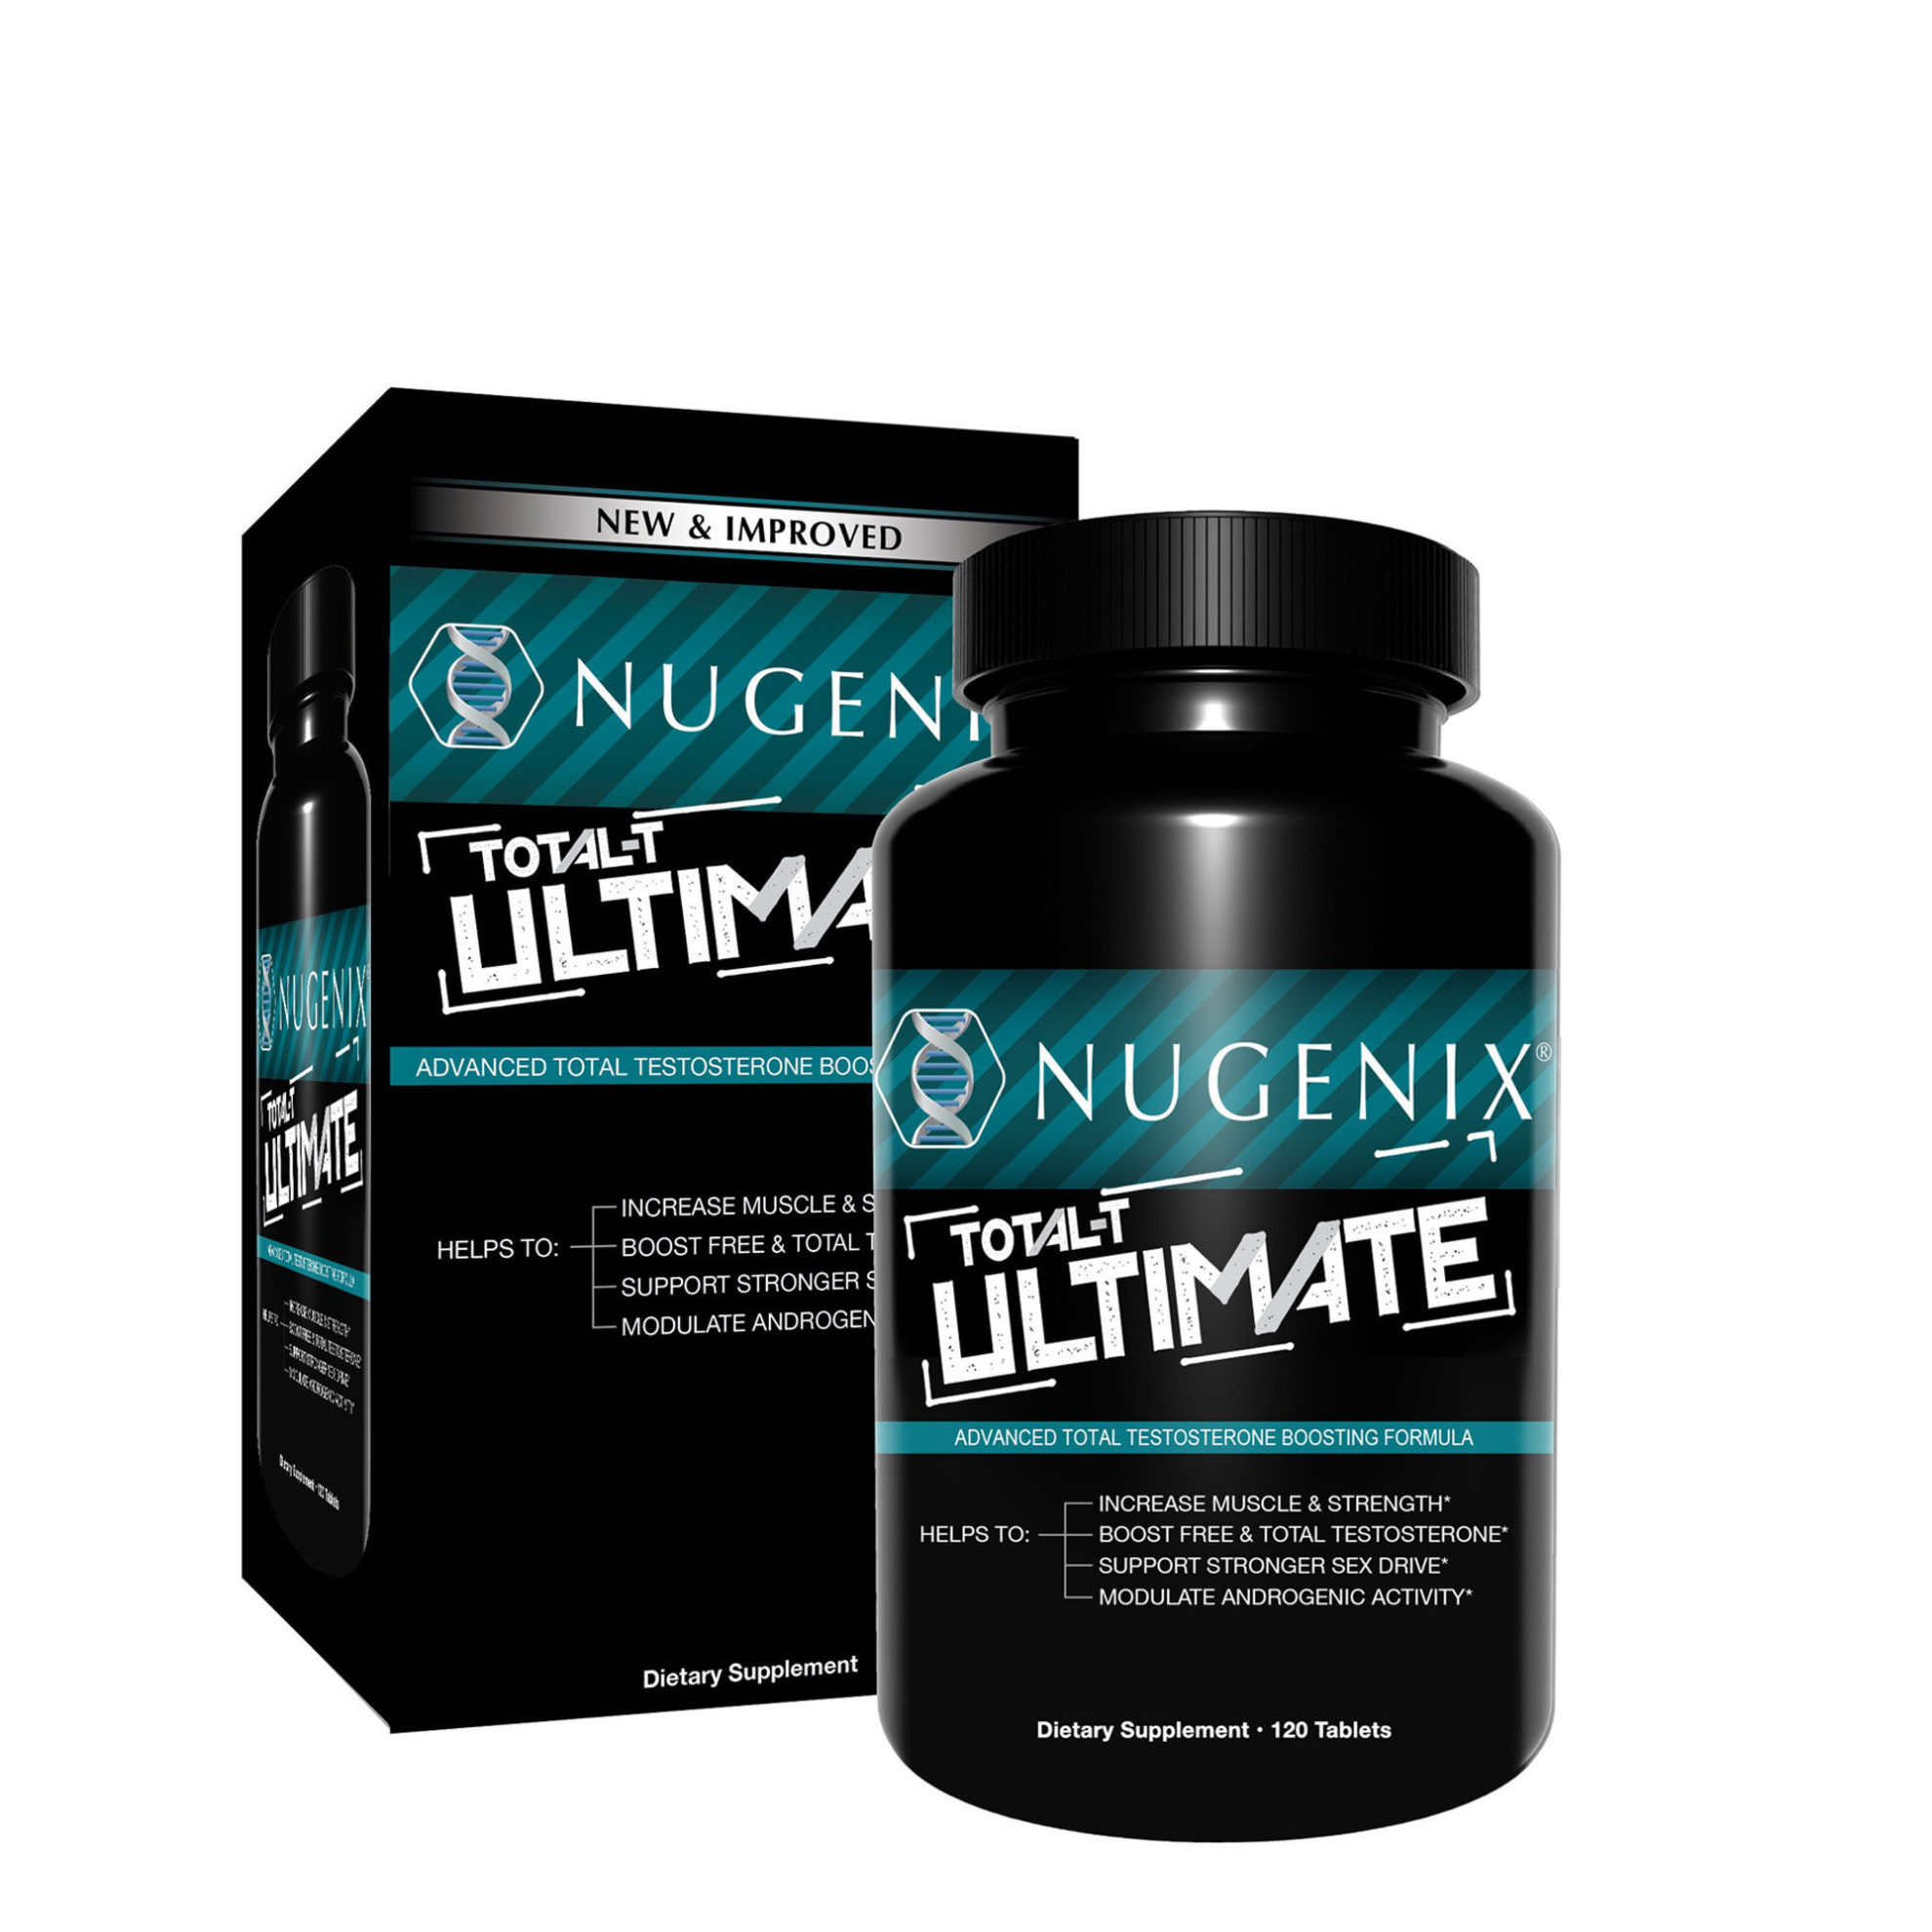 Nugenix Testosterone Booster Review Must Read This Before Buying